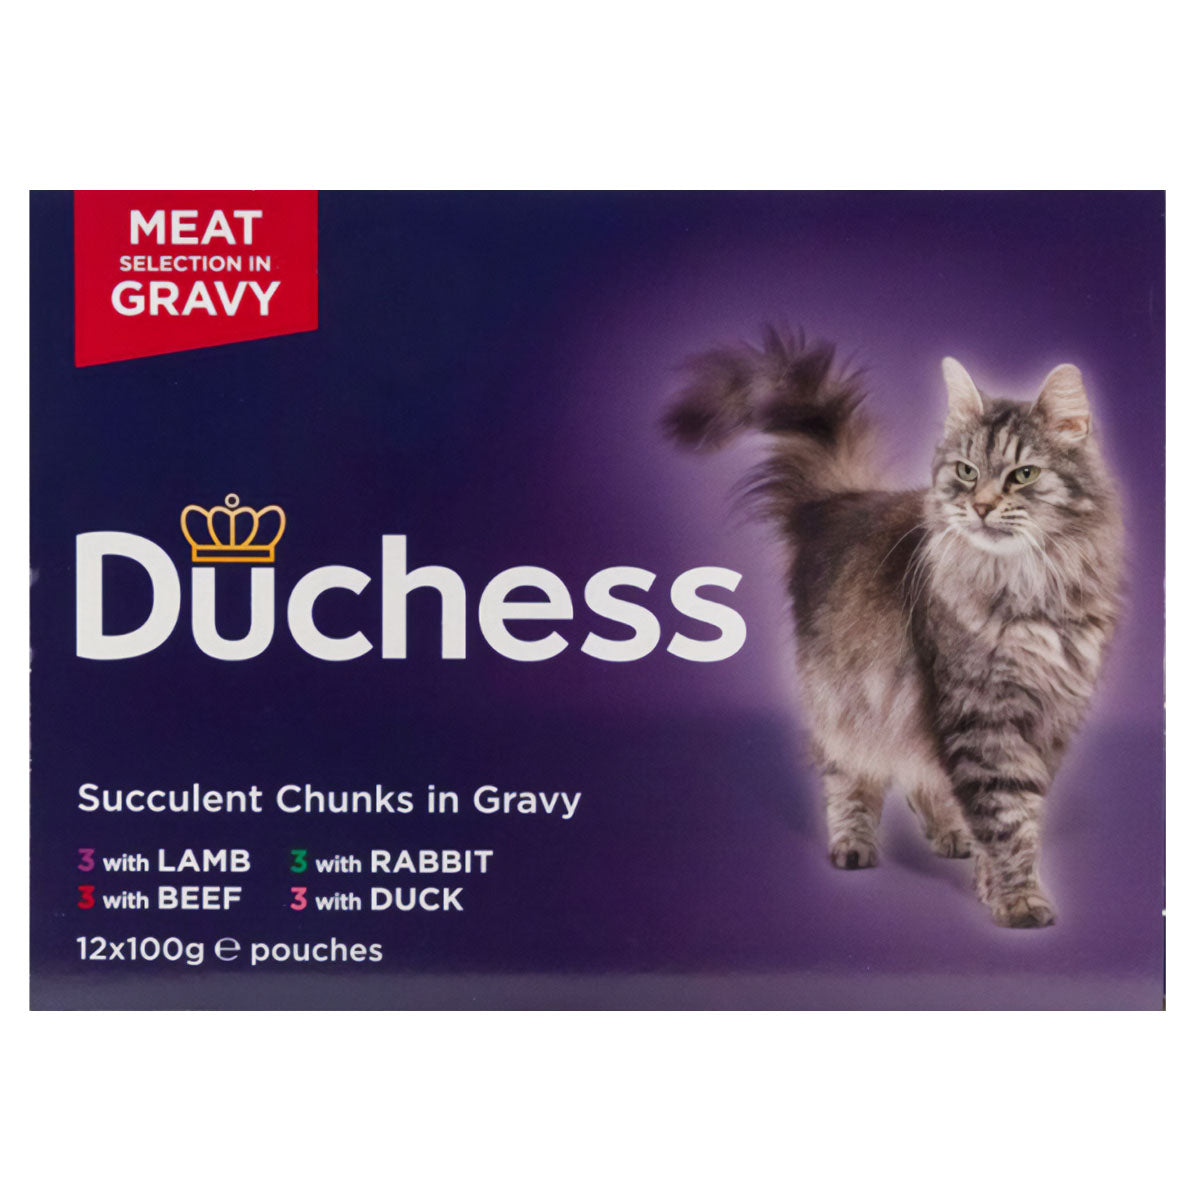 Duchess - Meat Selection in Gravy (Premium Quality) - 12x100g - Continental Food Store